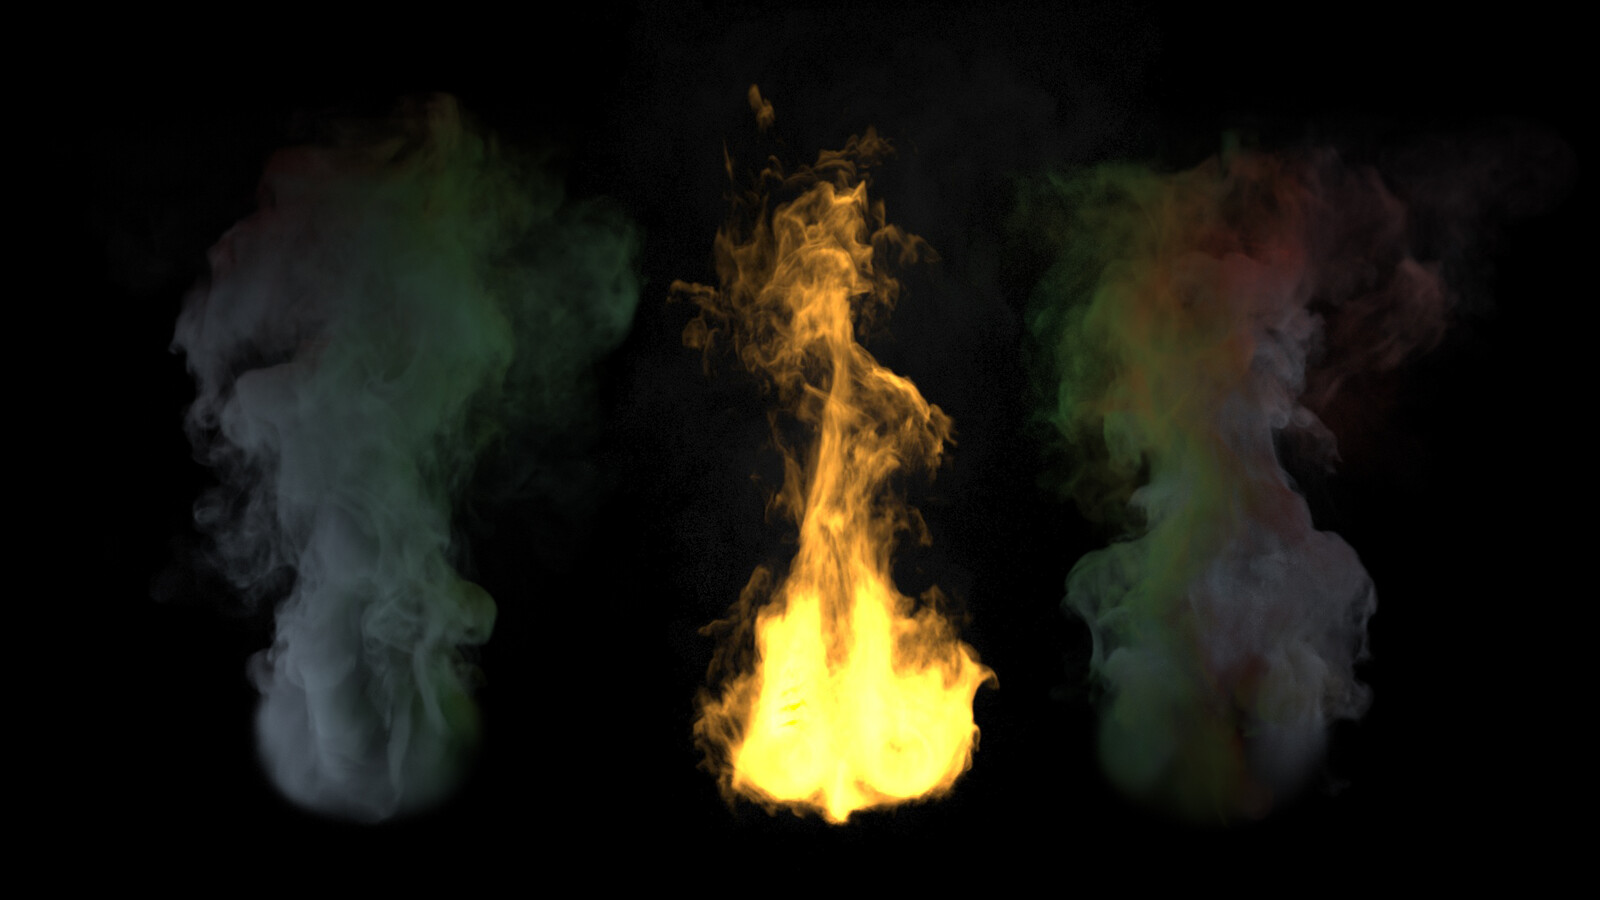 Smoke and fire tests with Houdini...